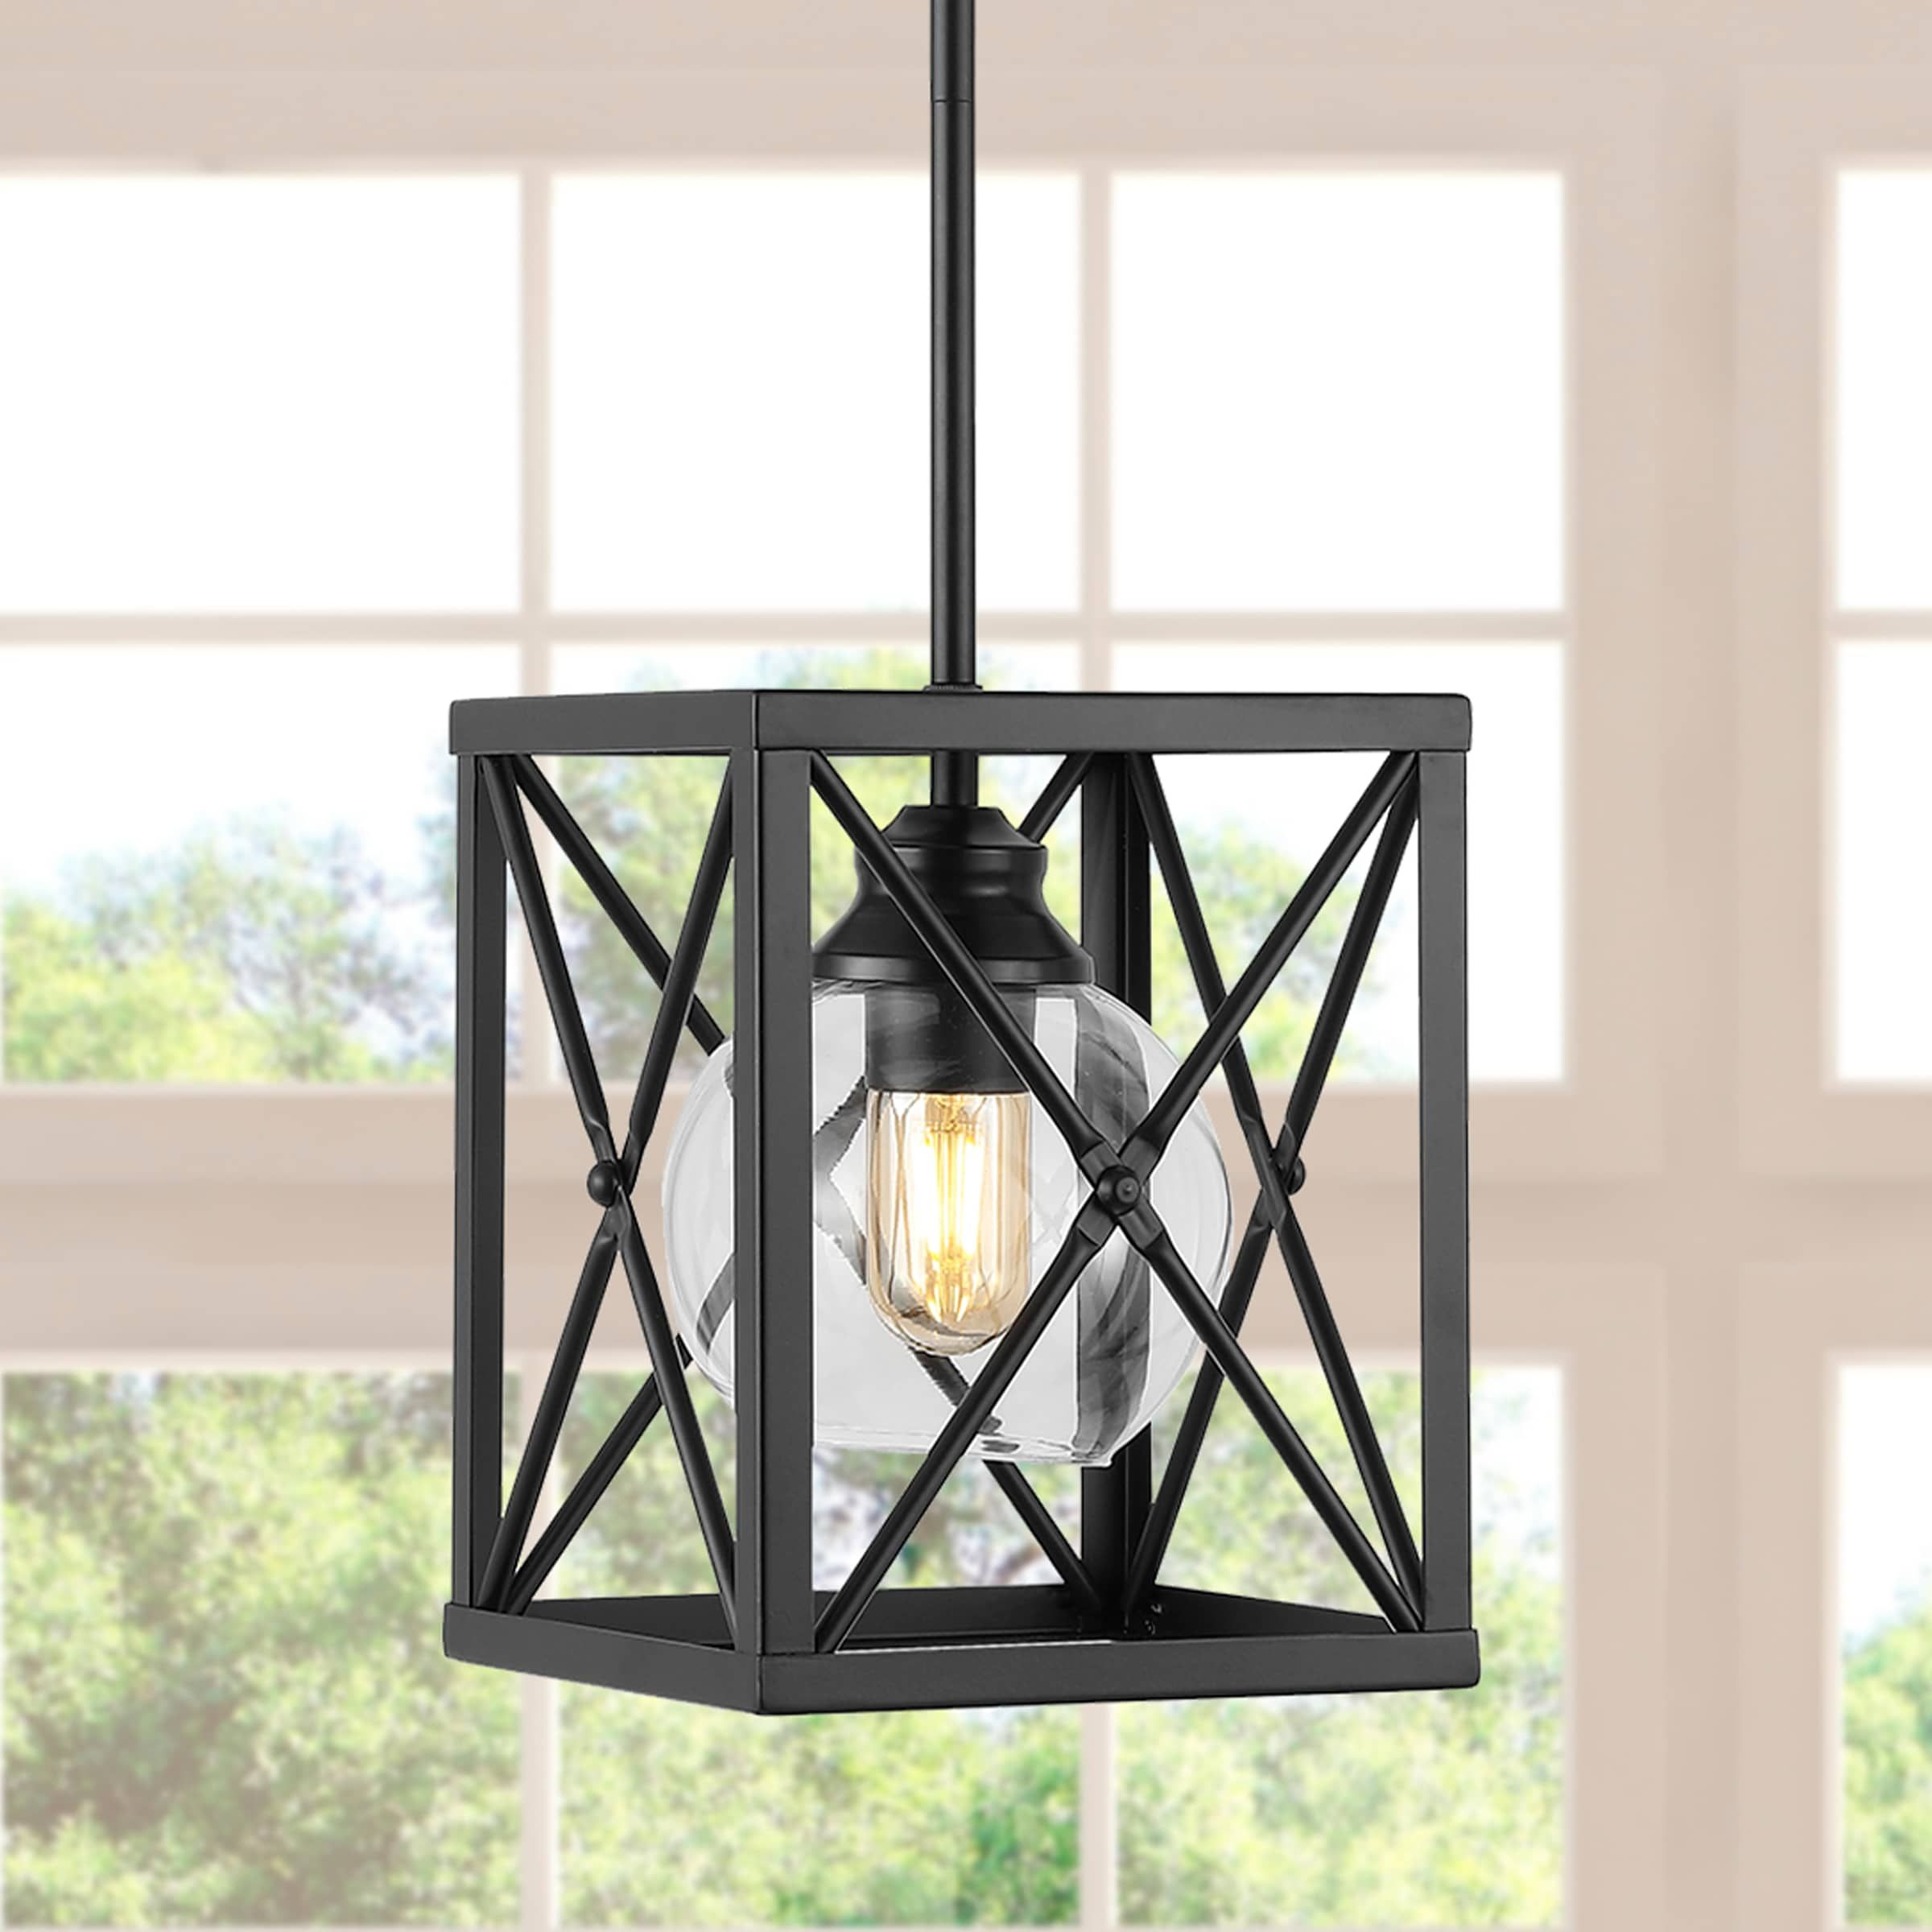 Clear Glass Shade Lantern Chandeliers Pertaining To Famous Jonathan Y Amara Industrial Rustic Oil Rubbed Bronze Farmhouse Clear Glass  Lantern Led Mini Pendant Light In The Pendant Lighting Department At  Lowes (View 8 of 15)